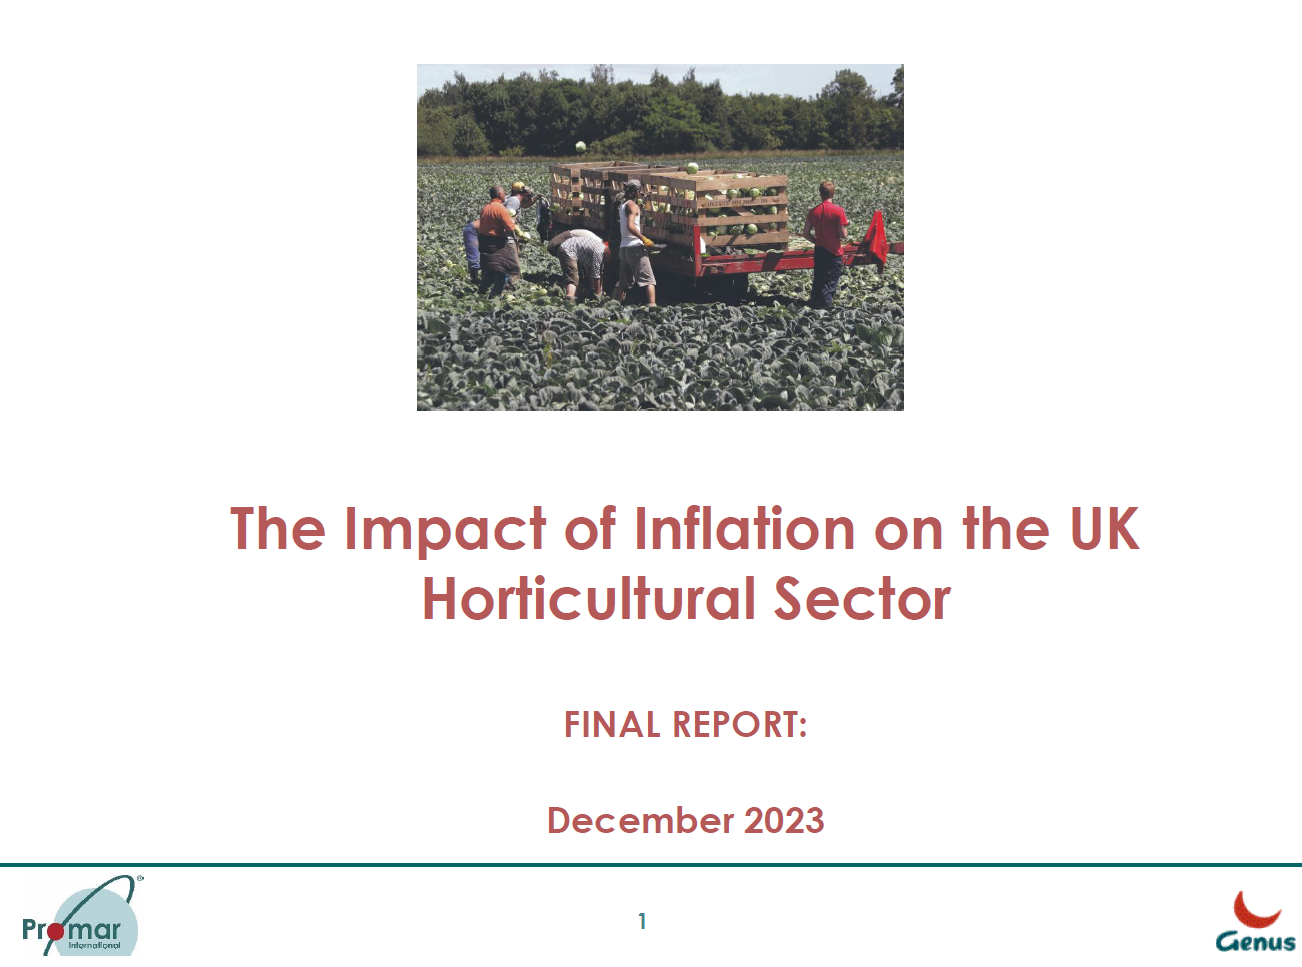 NFU-Promar horticulture inflation report 2023